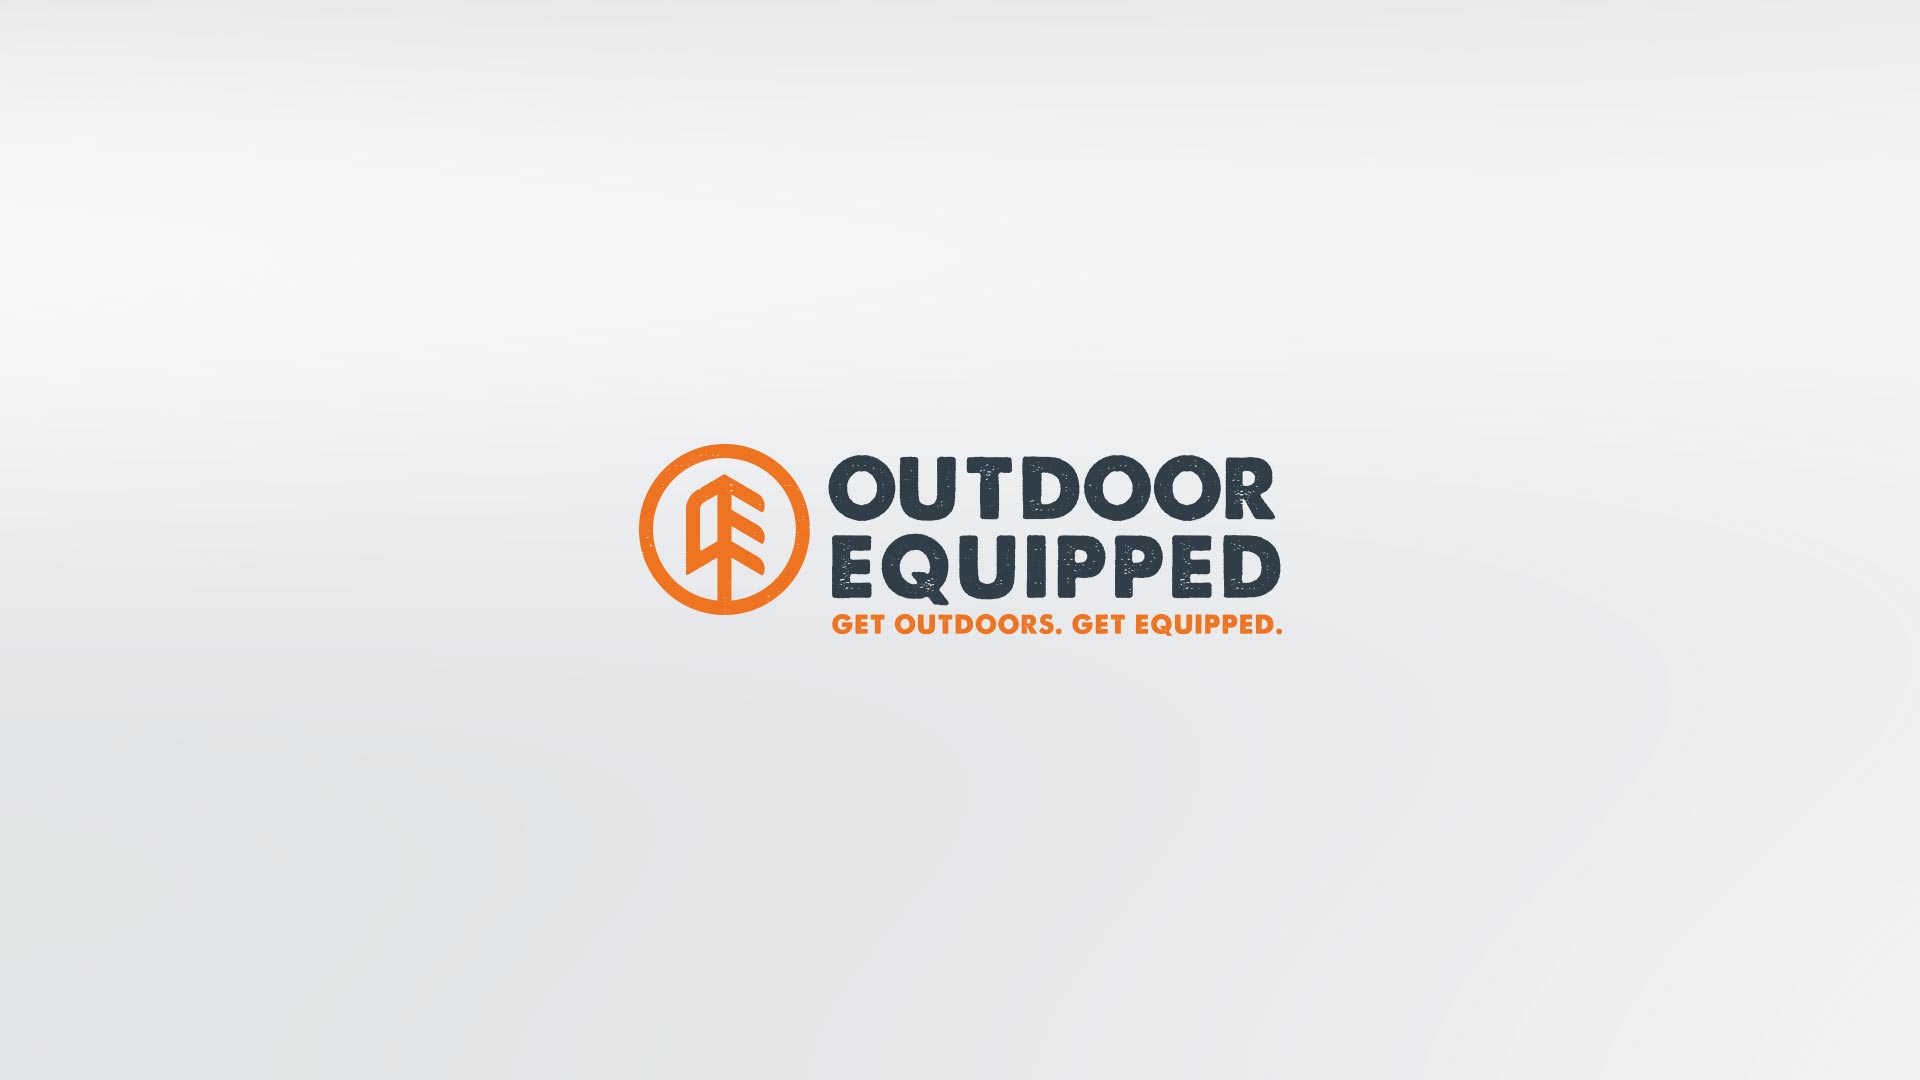 Outdoor Equipped Brand Identity - Provis Media